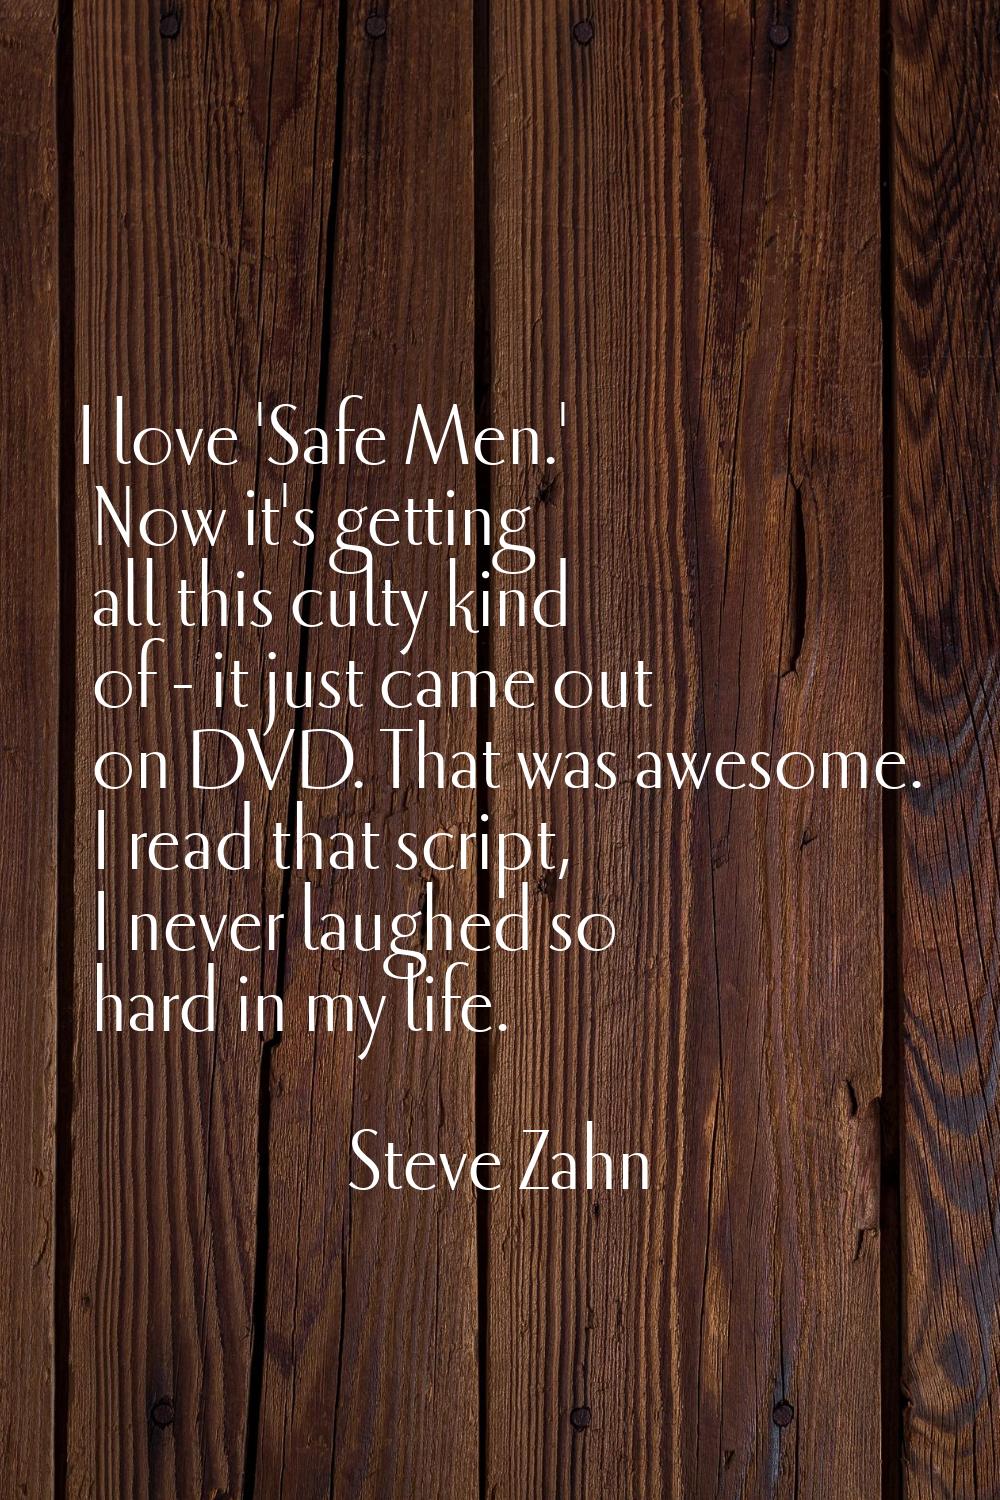 I love 'Safe Men.' Now it's getting all this culty kind of - it just came out on DVD. That was awes